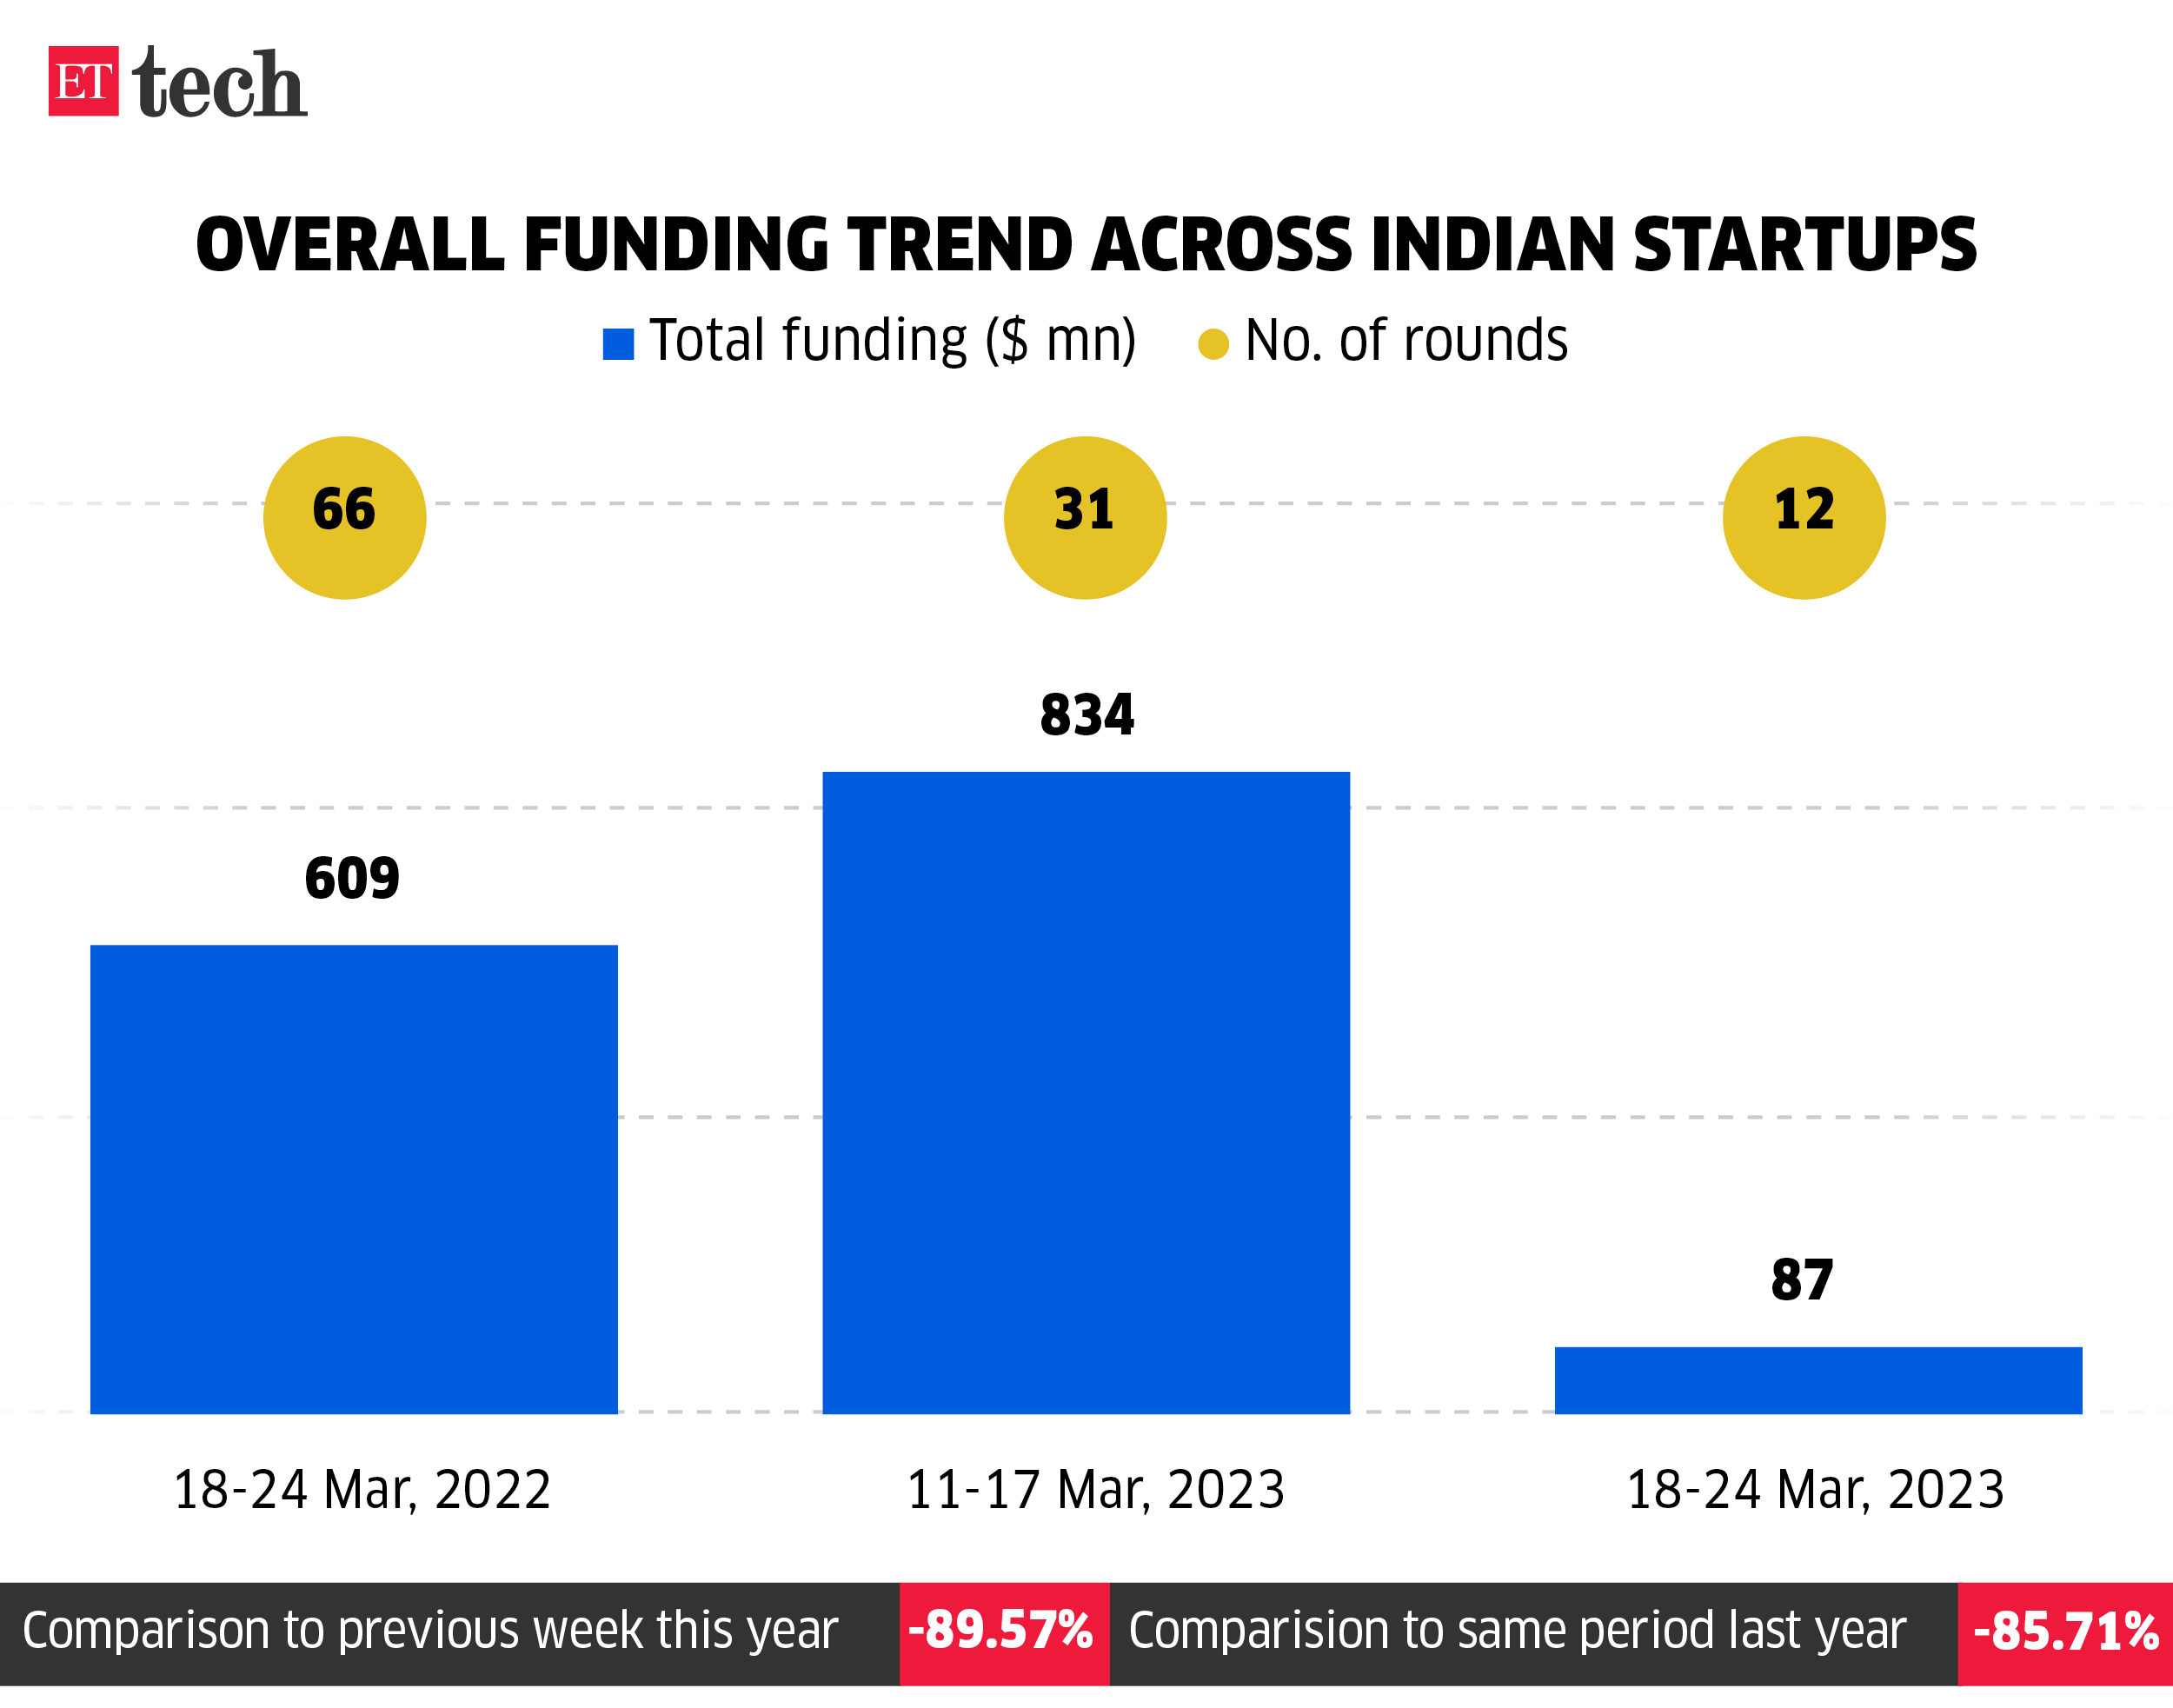 Overall funding trend across Indian startups